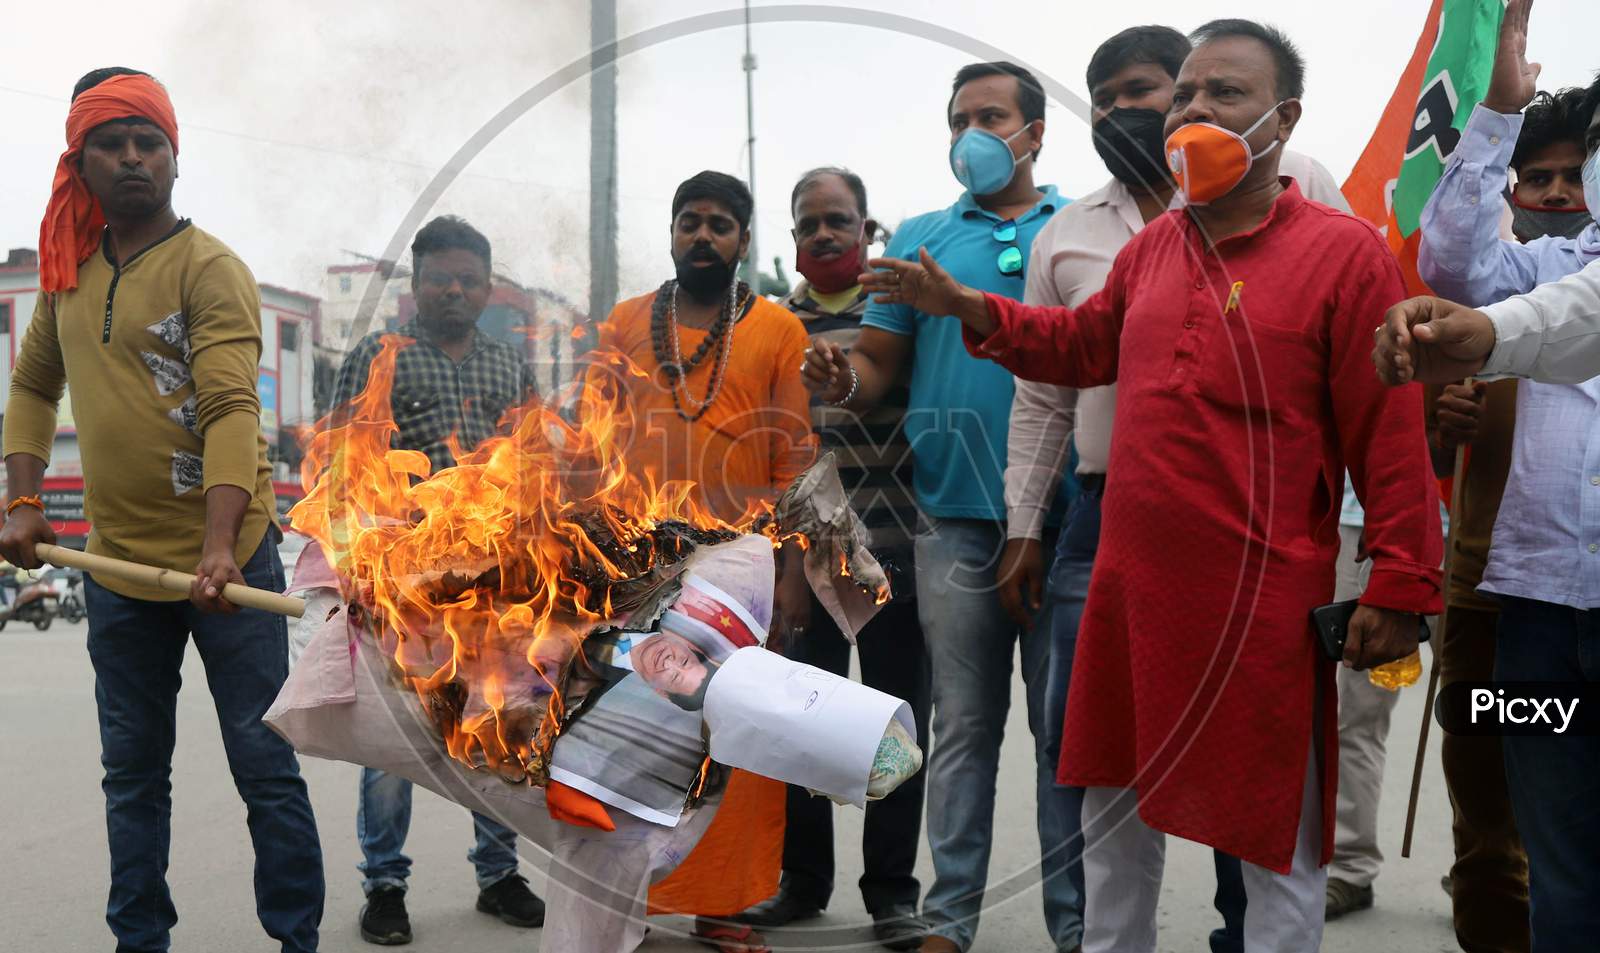 Supporters Of Bharatiya Jayanta Party (Bjp) Burn Posters and effigy of China's President Xi Jinping During A Protest Against China in Prayagraj on June 17, 2020 after a violent face off between Indian Army and Chinese PLA in Galwan Valley.